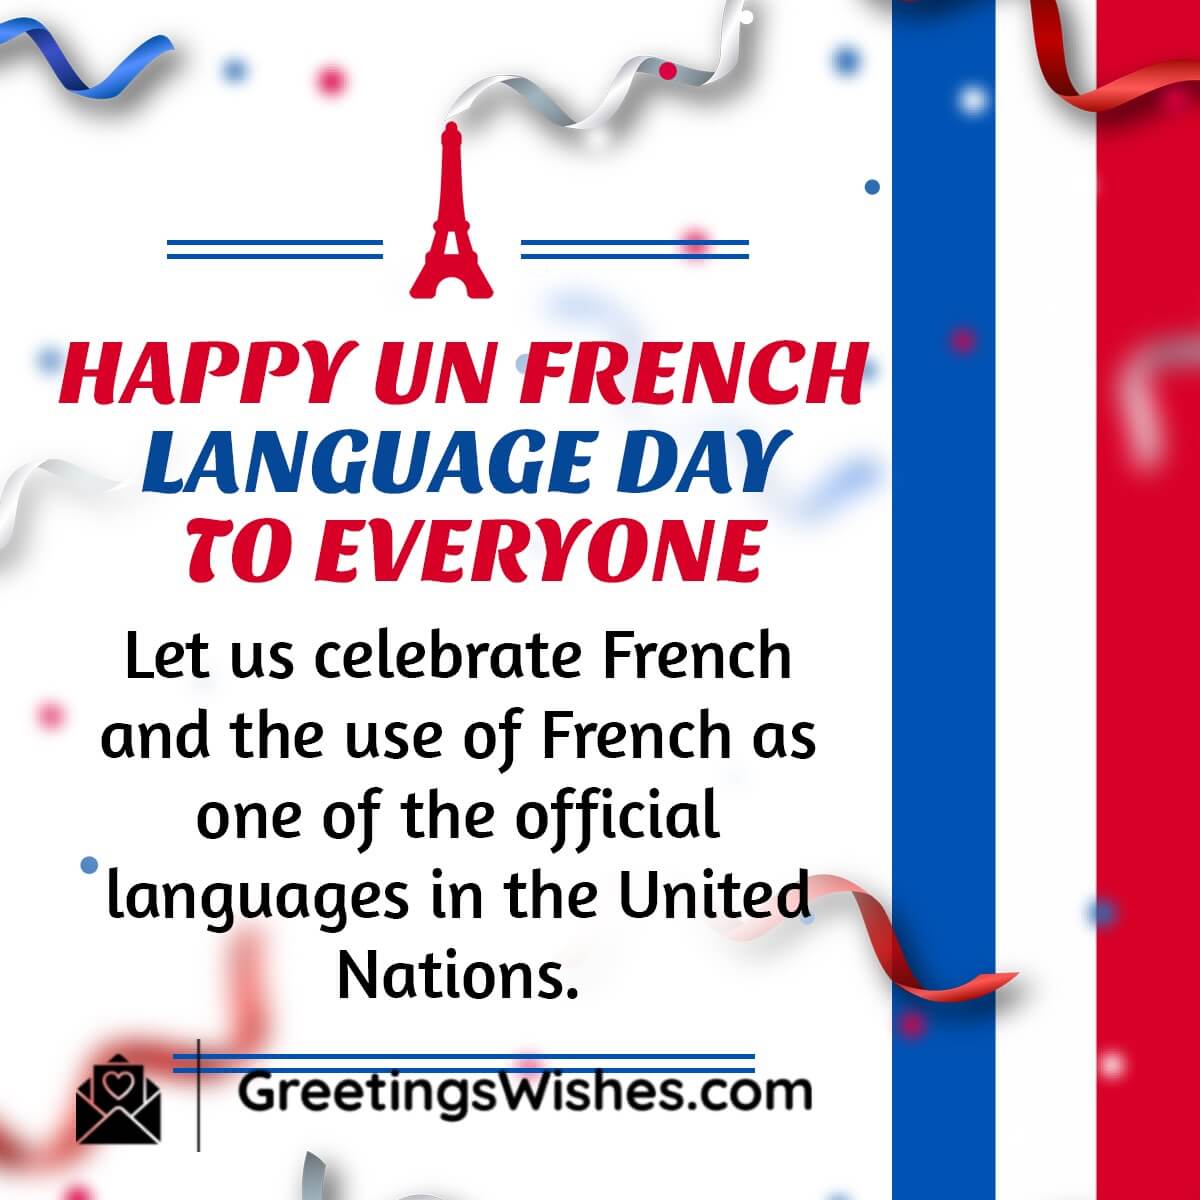 Un French Language Day Messages, Quotes